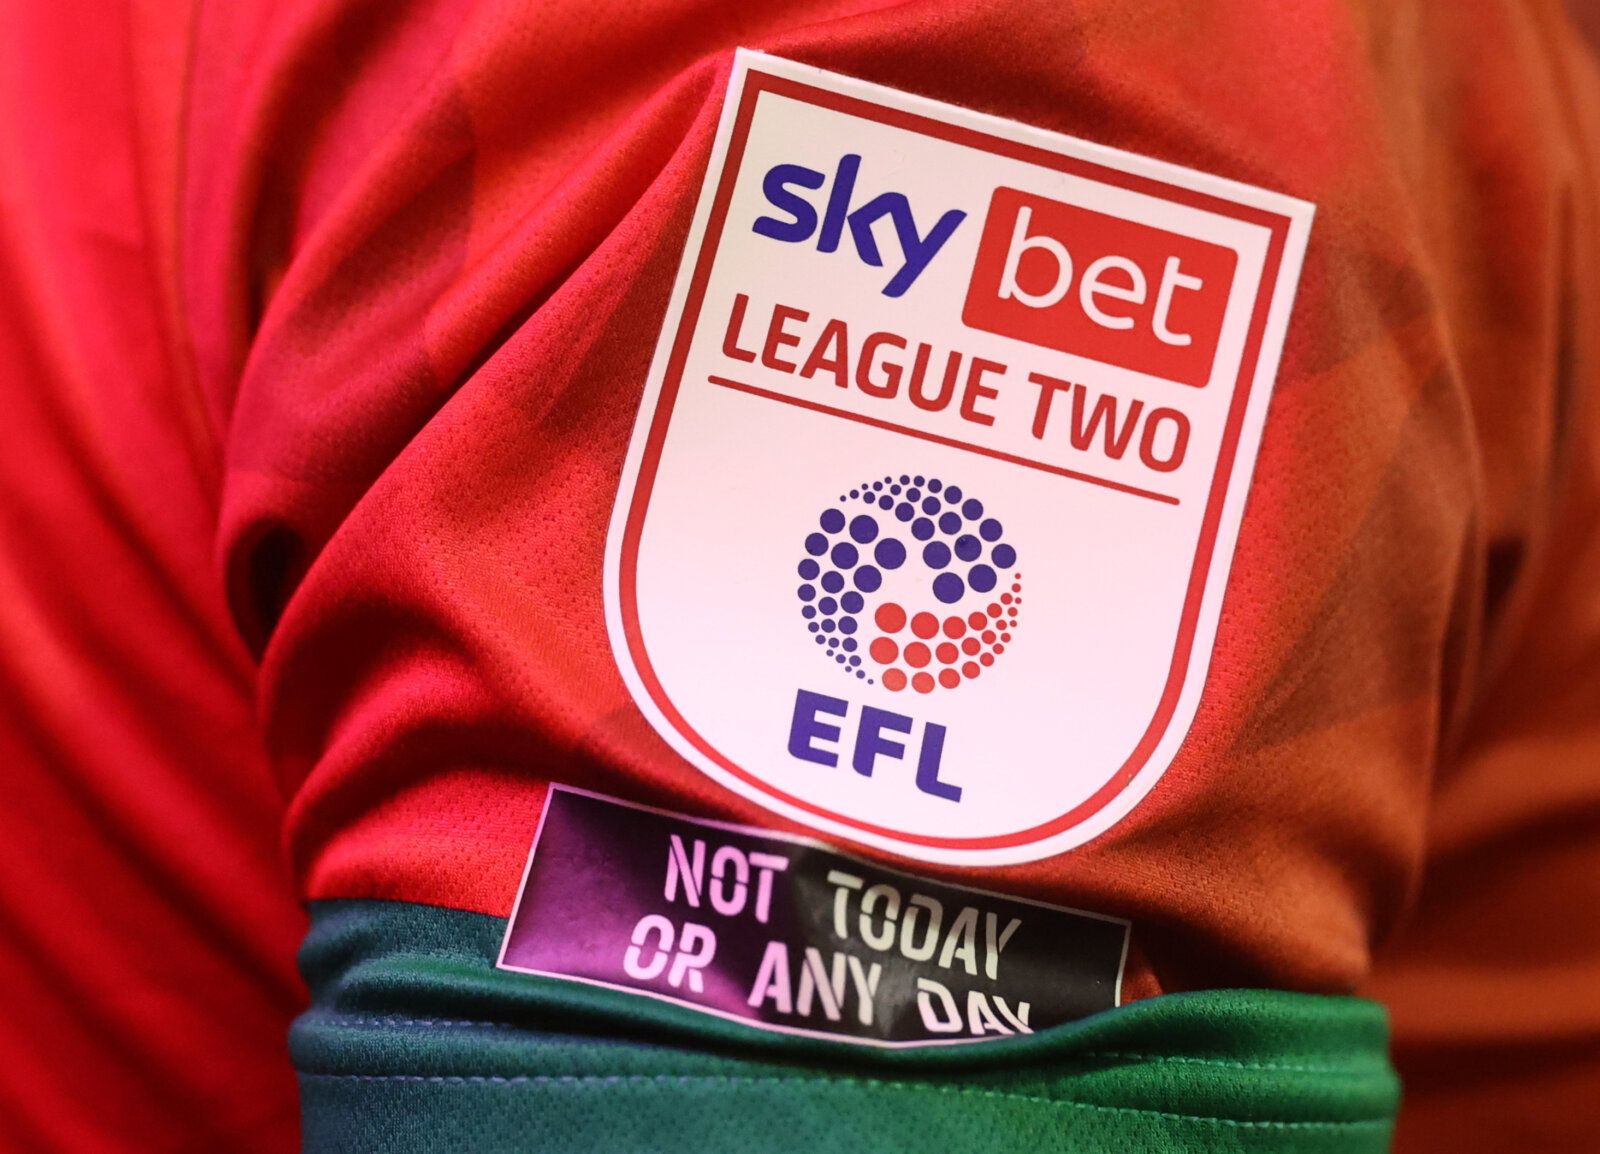 Soccer Football - League Two - Walsall v Leyton Orient - The Banks's Stadium, Walsall, Britain - October 13, 2020   A League Two badge and a against racism badge is seen on a Walsall shirt   Action Images/Carl Recine    EDITORIAL USE ONLY. No use with unauthorized audio, video, data, fixture lists, club/league logos or 